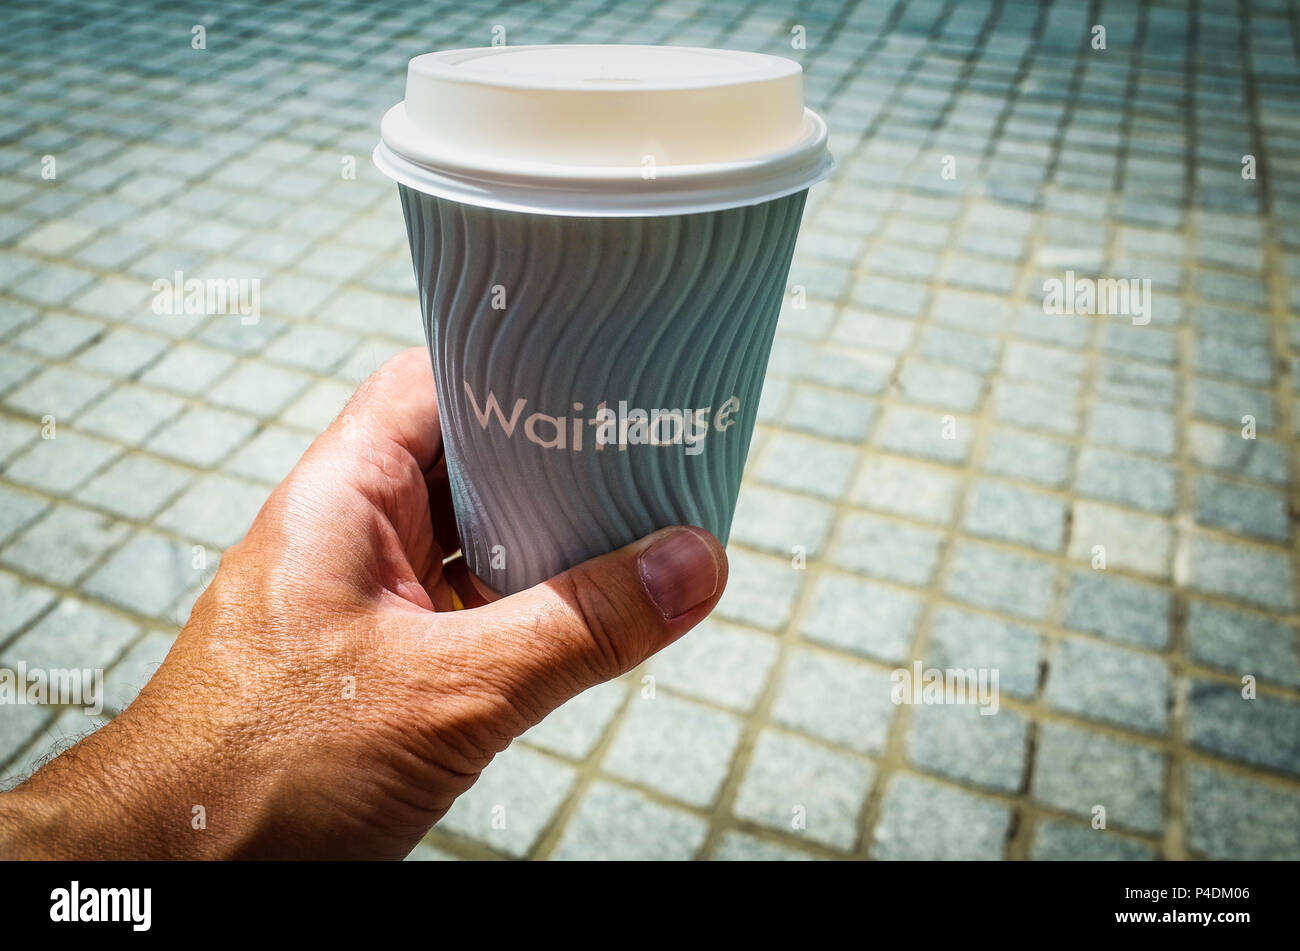 A Waitrose Complementary Coffee Cup - the cups are being phased out, customers will need reusable cups in future Stock Photo